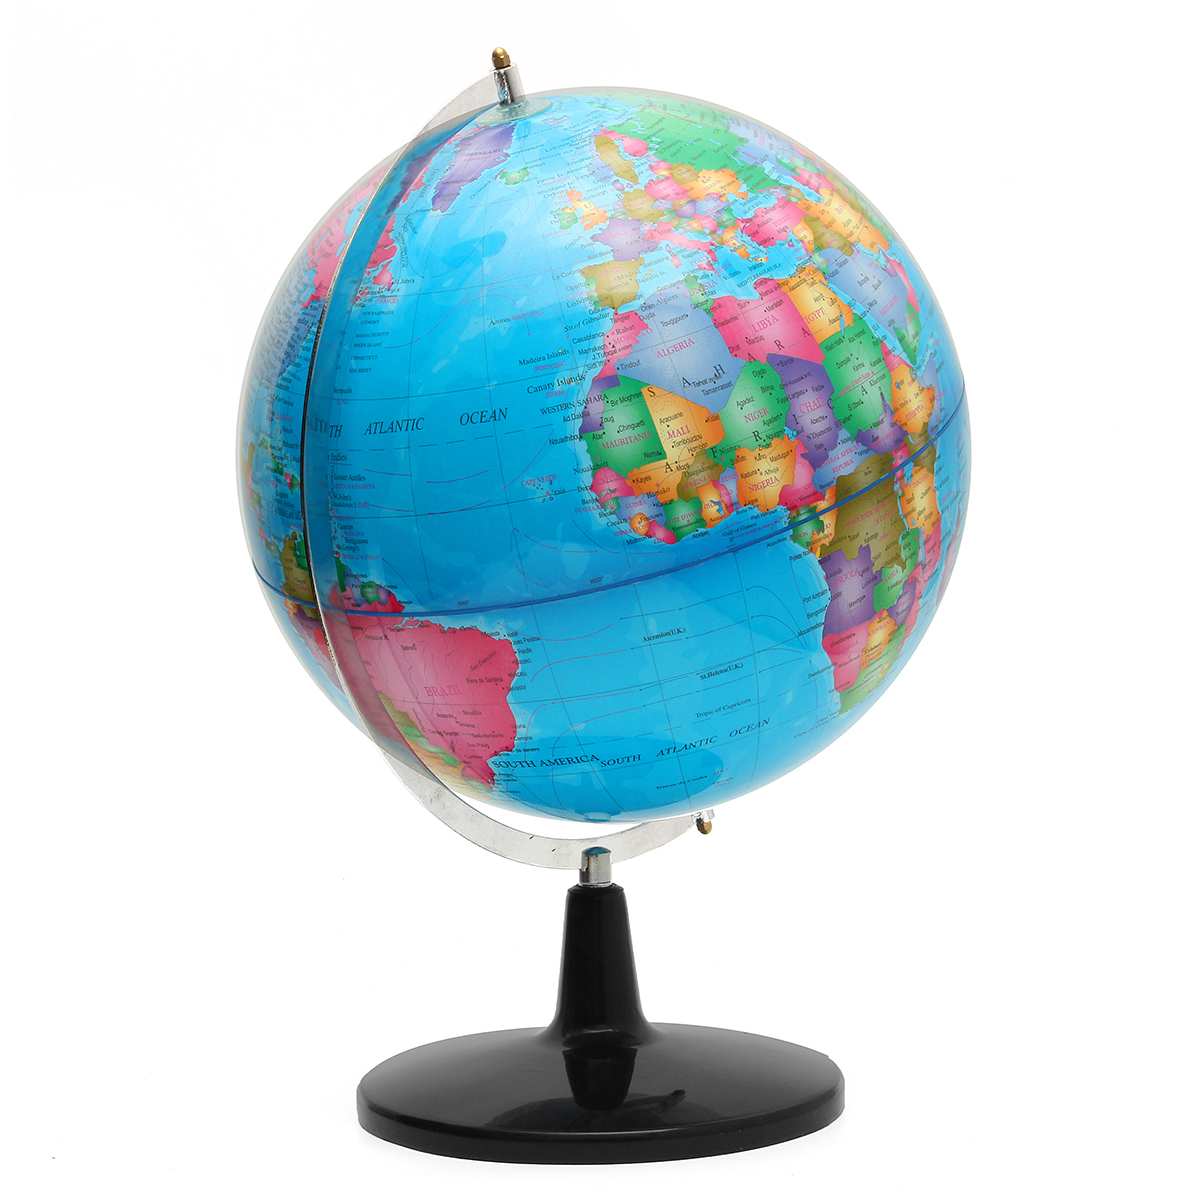 32CM Big Large Rotating Globe World Map of Earth Geography School Educational Tool Home Office Ornament